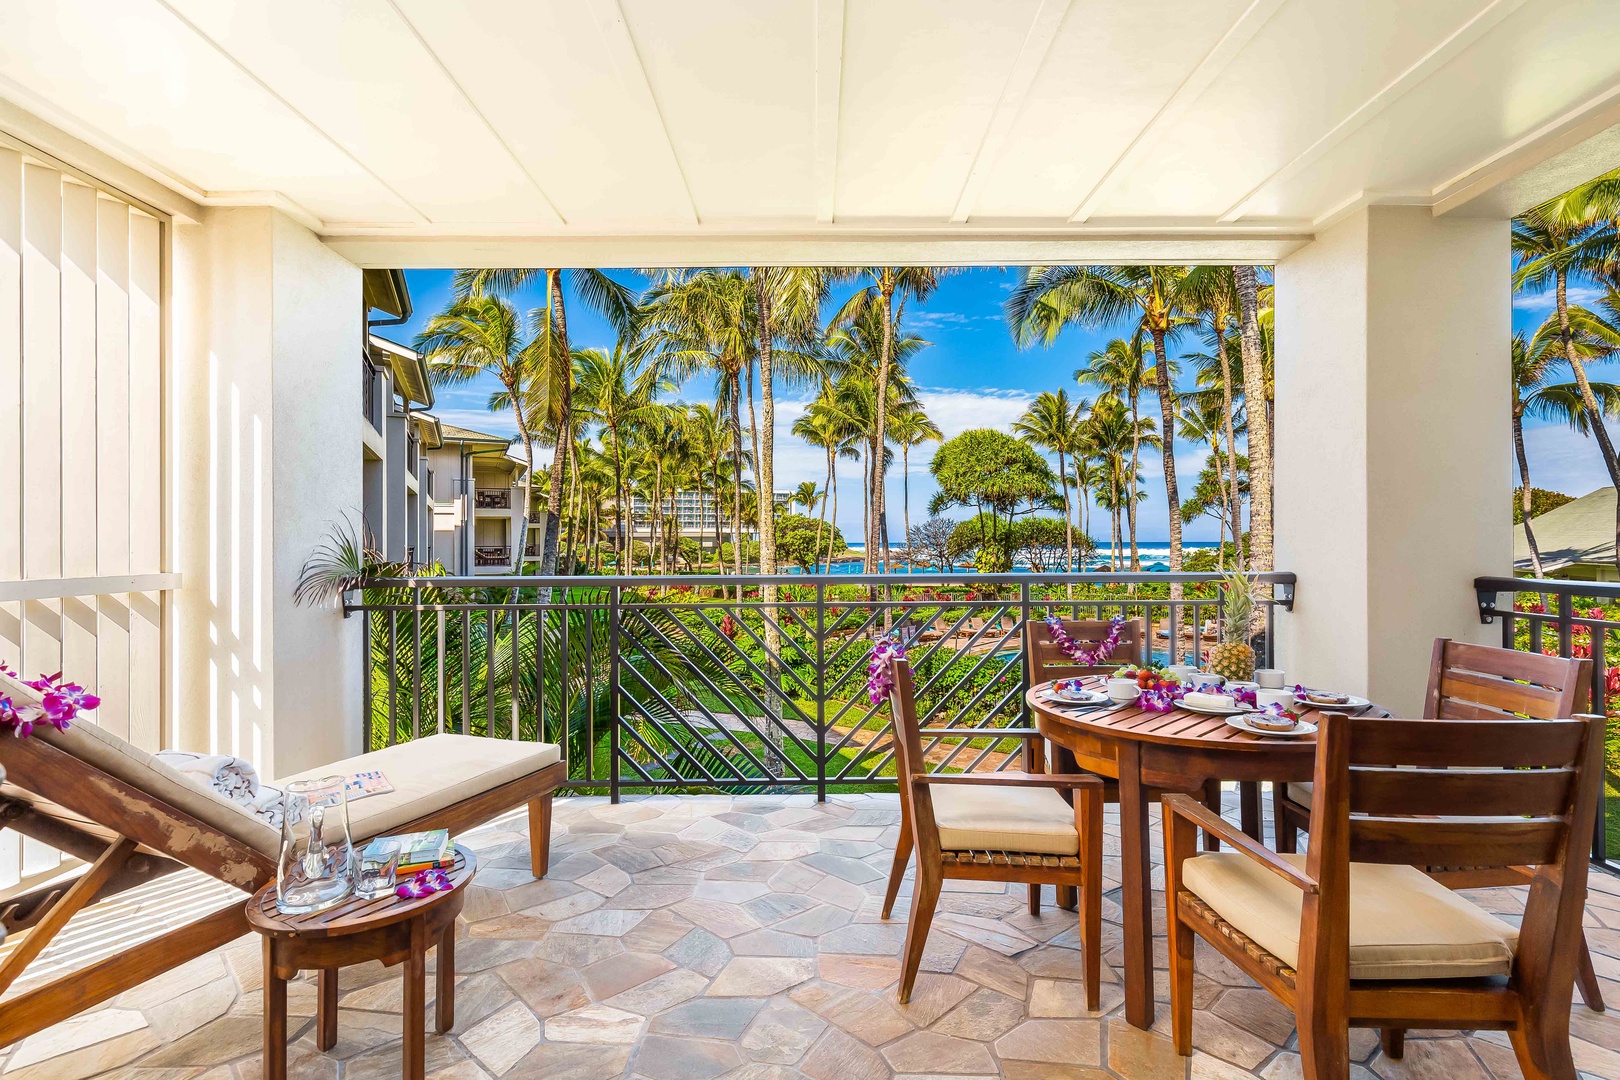 Kahuku Vacation Rentals, Turtle Bay Villas 210 - This 2nd floor condo welcomes you and an additional 7 guests to experience all of the magic that Oahu has to offer